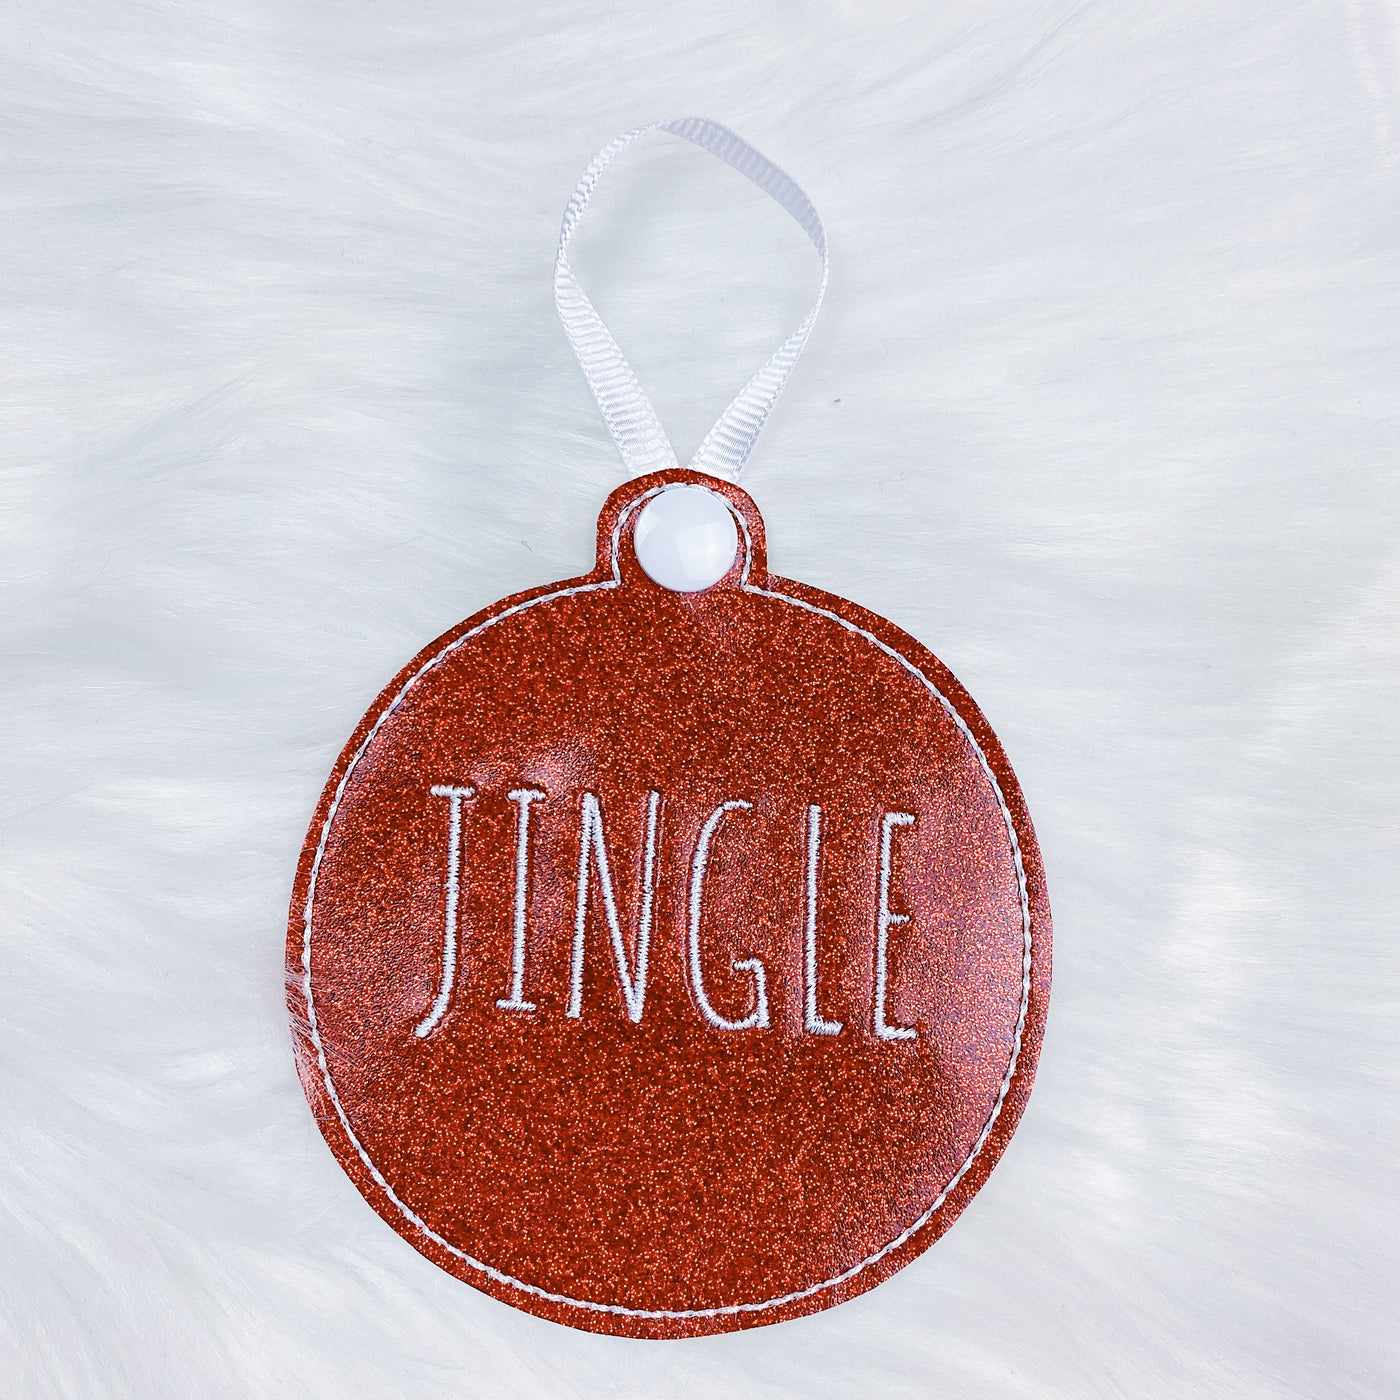 Merry, Noel, + Jingle Shiny Red Vegan Leather Embroidered Ornaments | Set of 3